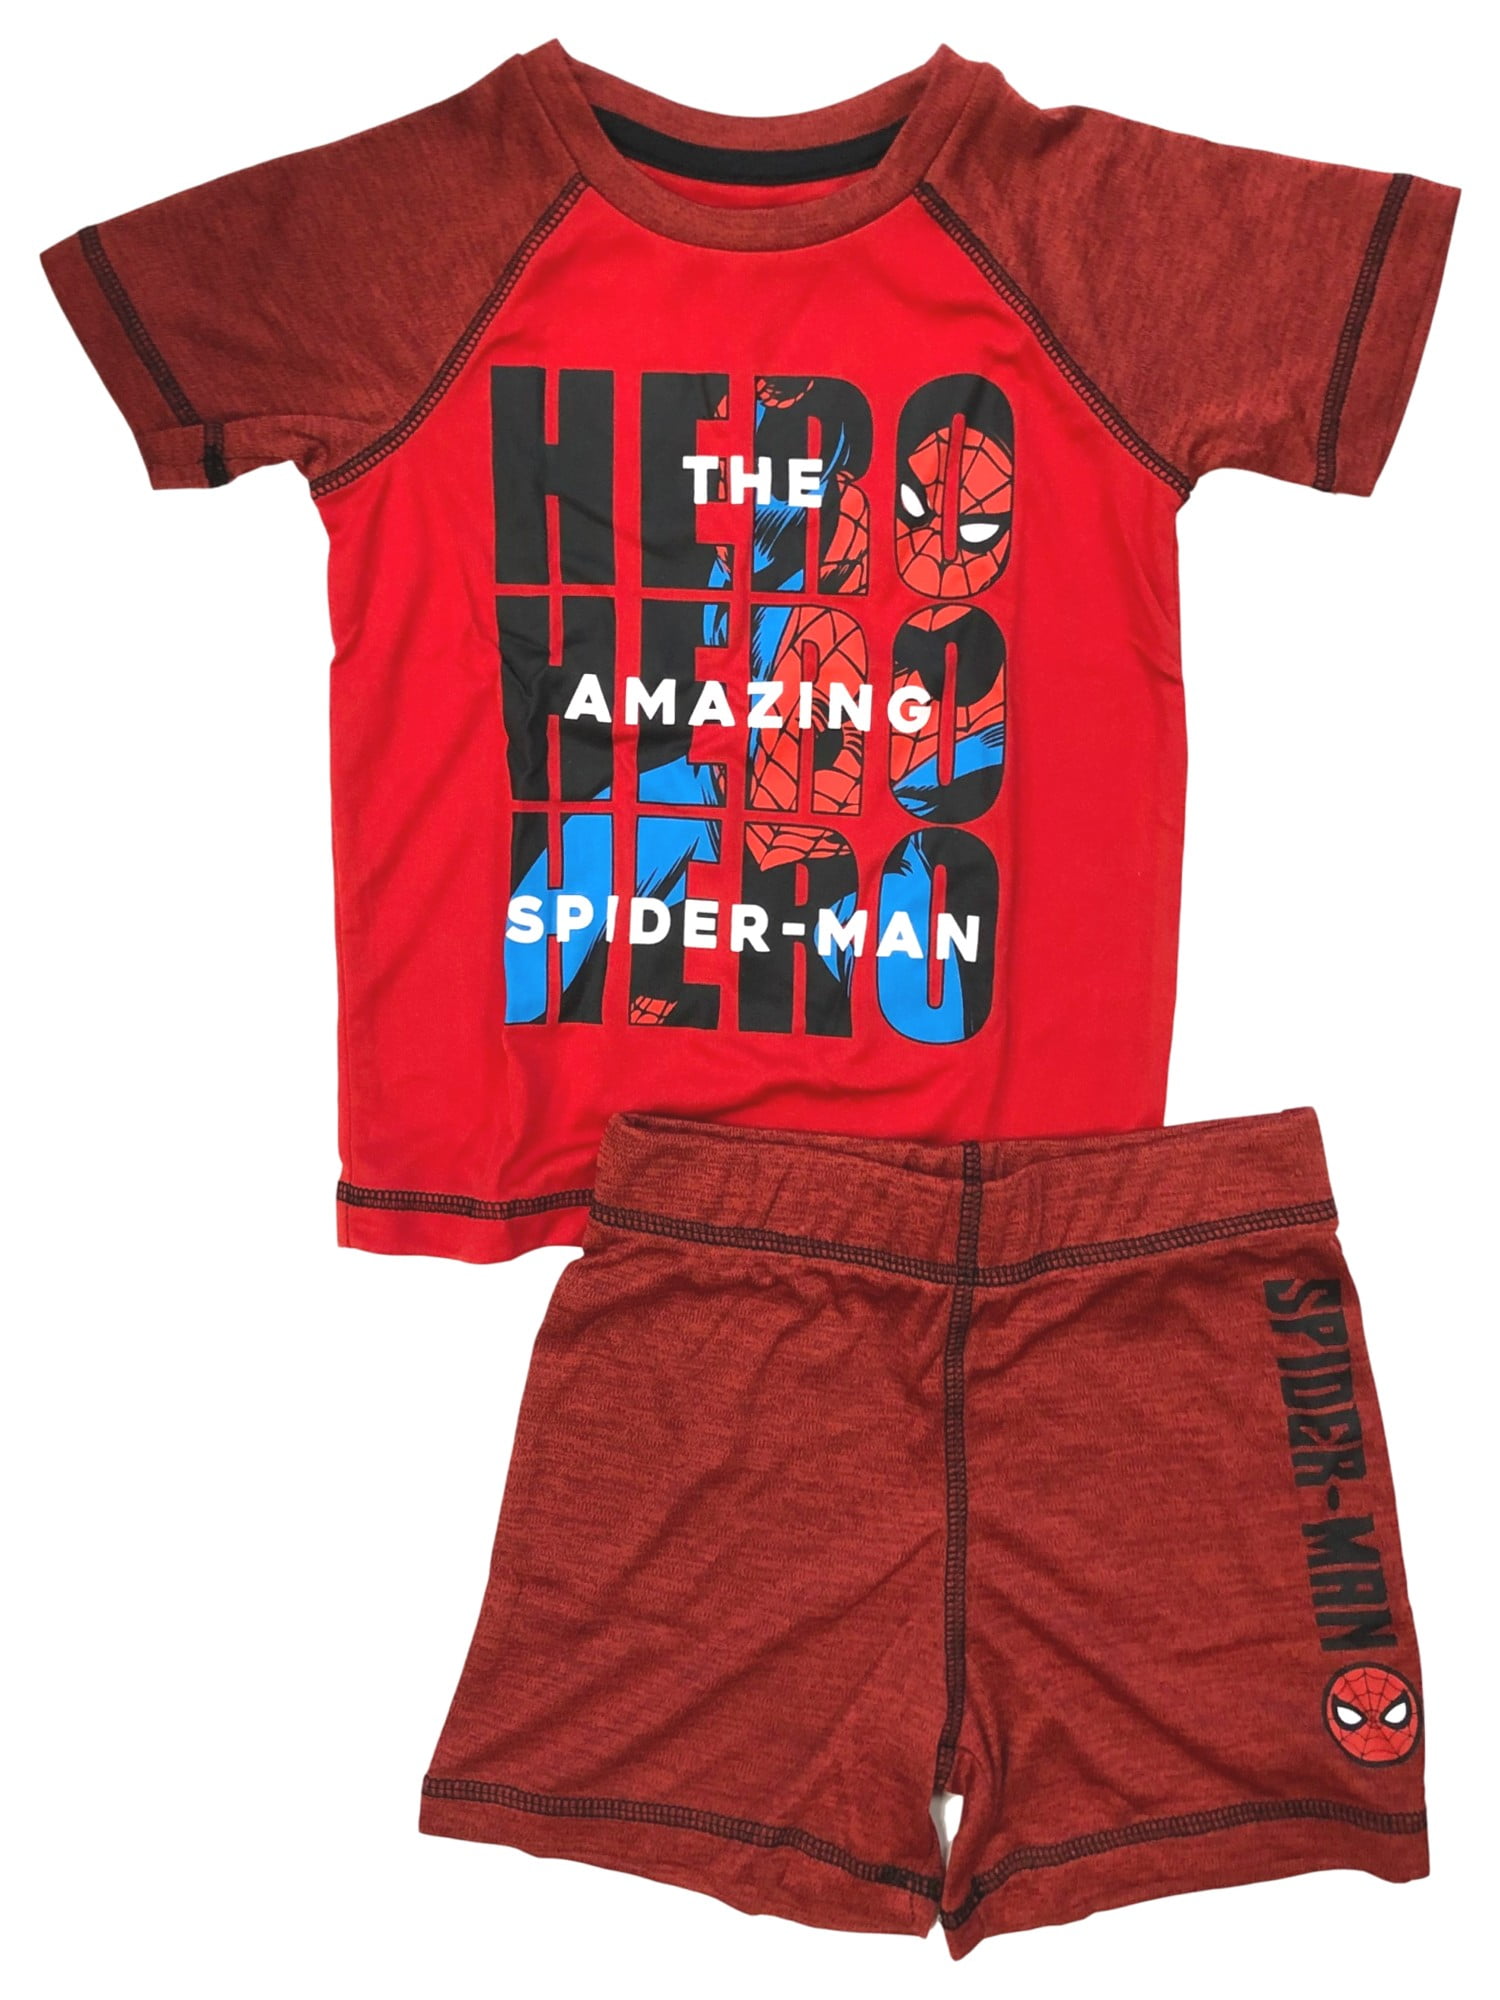 Marvel Spider-Man Toddler Girls T-Shirt and Leggings Outfit Set